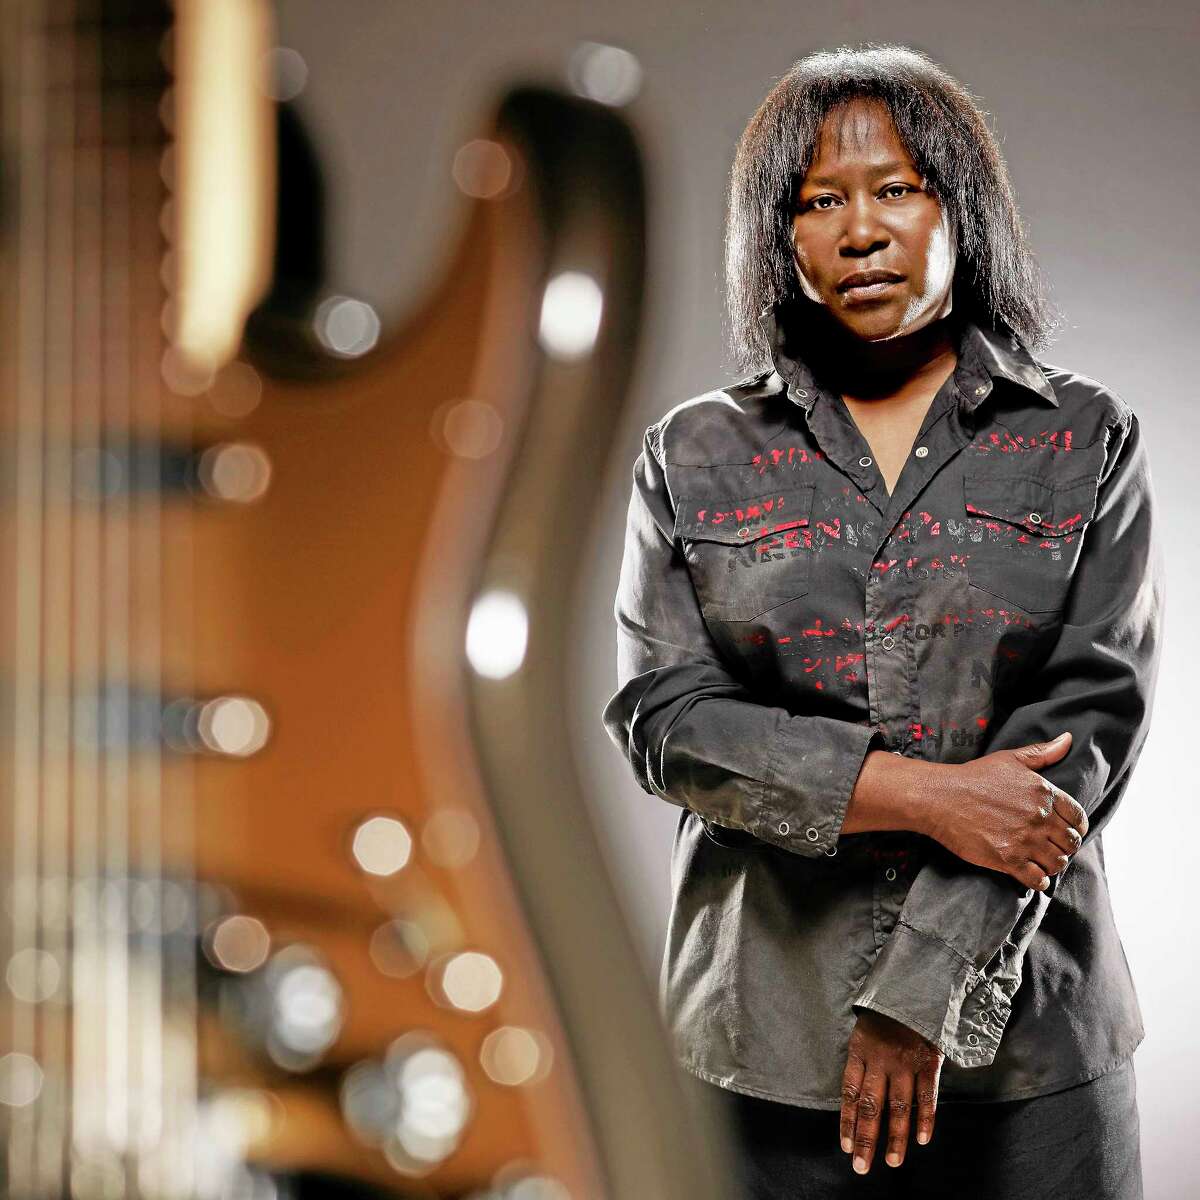 Contributed photoDon't miss Joan Armatrading when she performs at Infinity Hall in Hartford on Friday Oct. 30. For tickets or more information, call 866-666-6306 or visit www.infinityhall.com